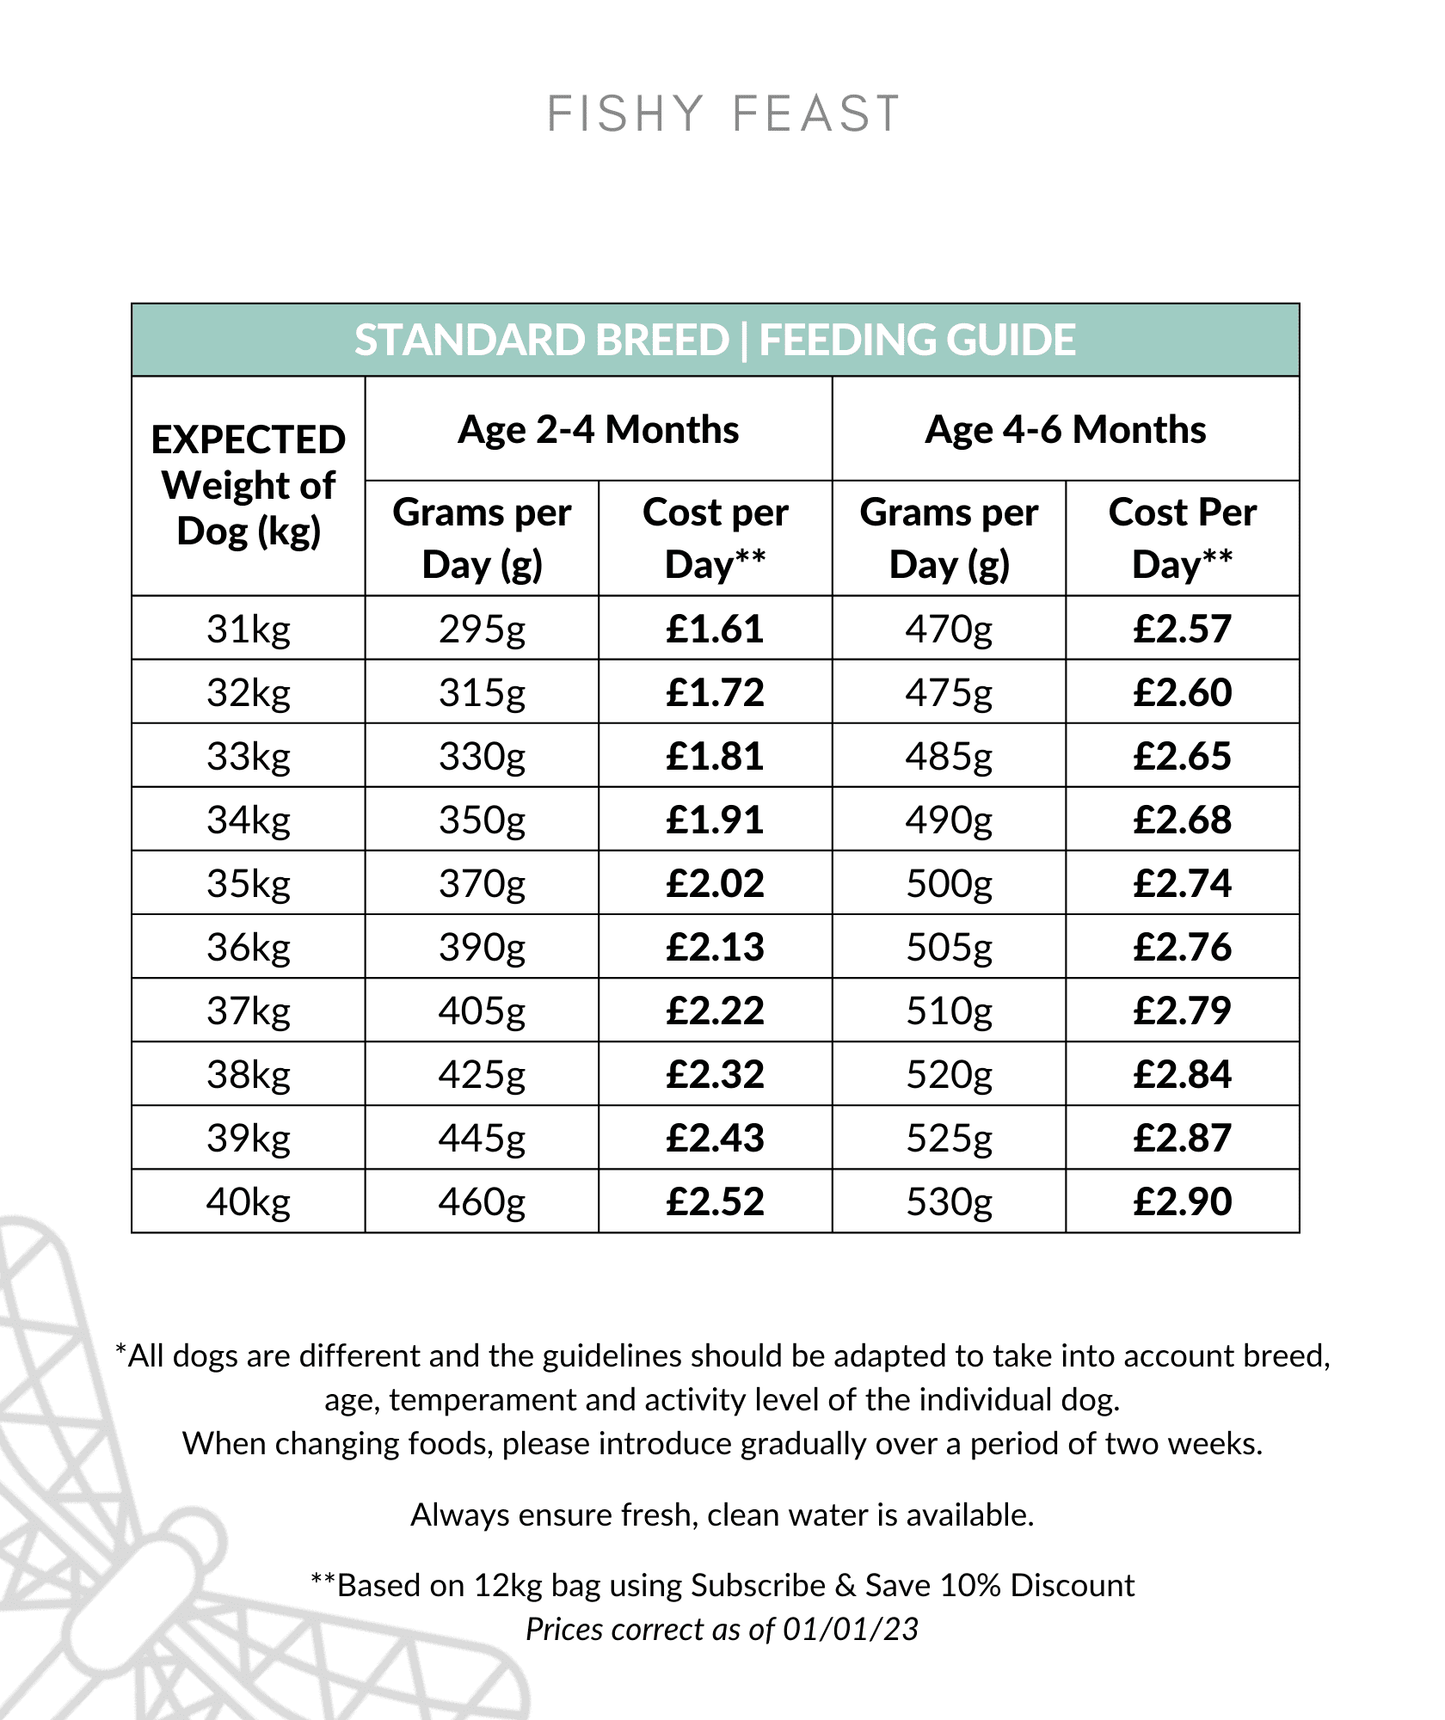 Fishy Feast feeding guide 31-40kg up to 6 months